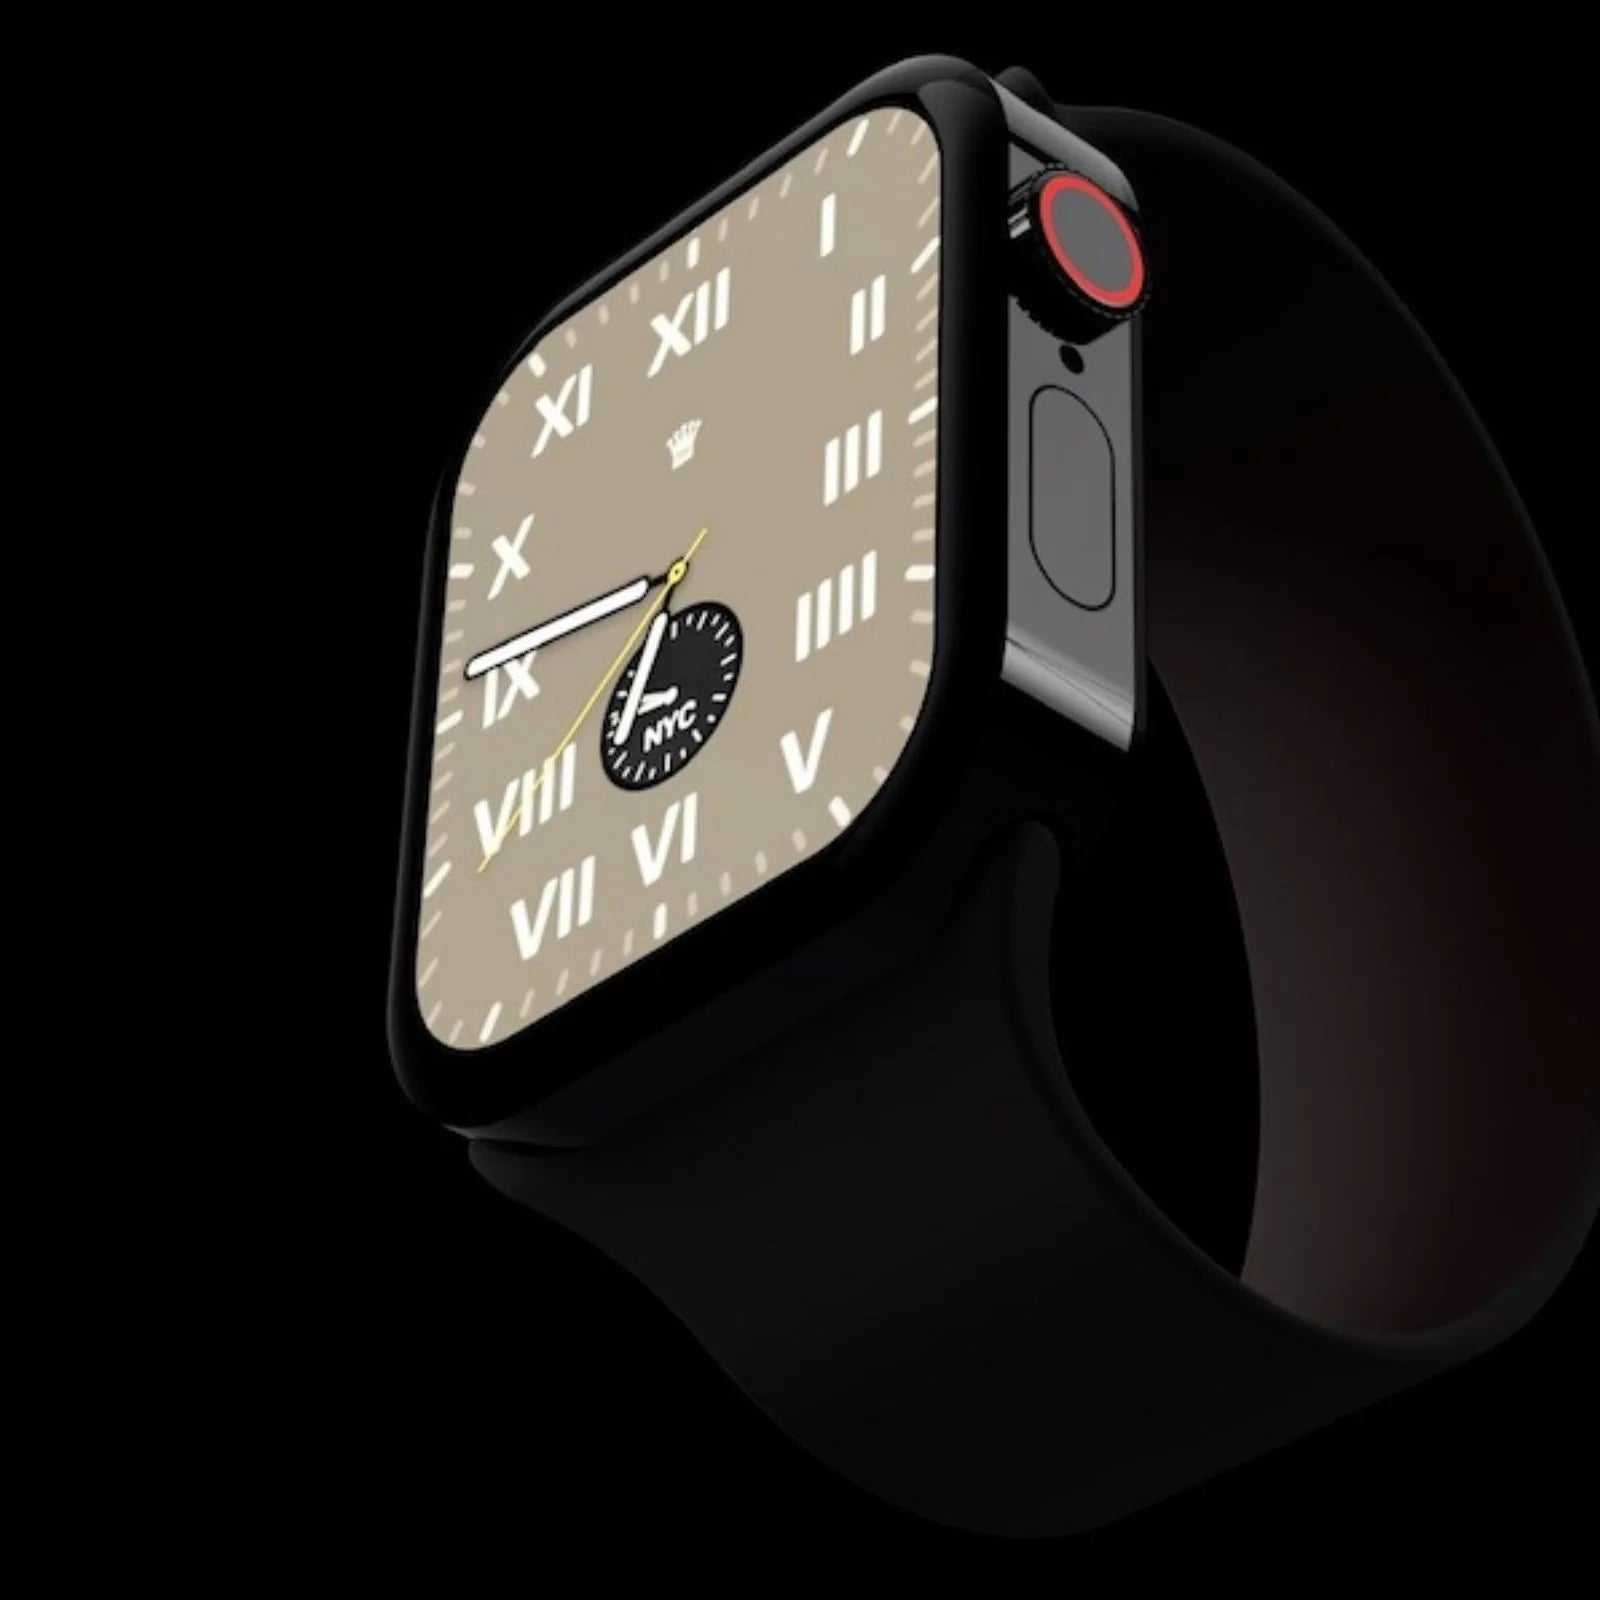 Apple Watch X: Apple working on Watch X model featuring new design, blood  pressure monitor, upgraded display: Report - The Economic Times